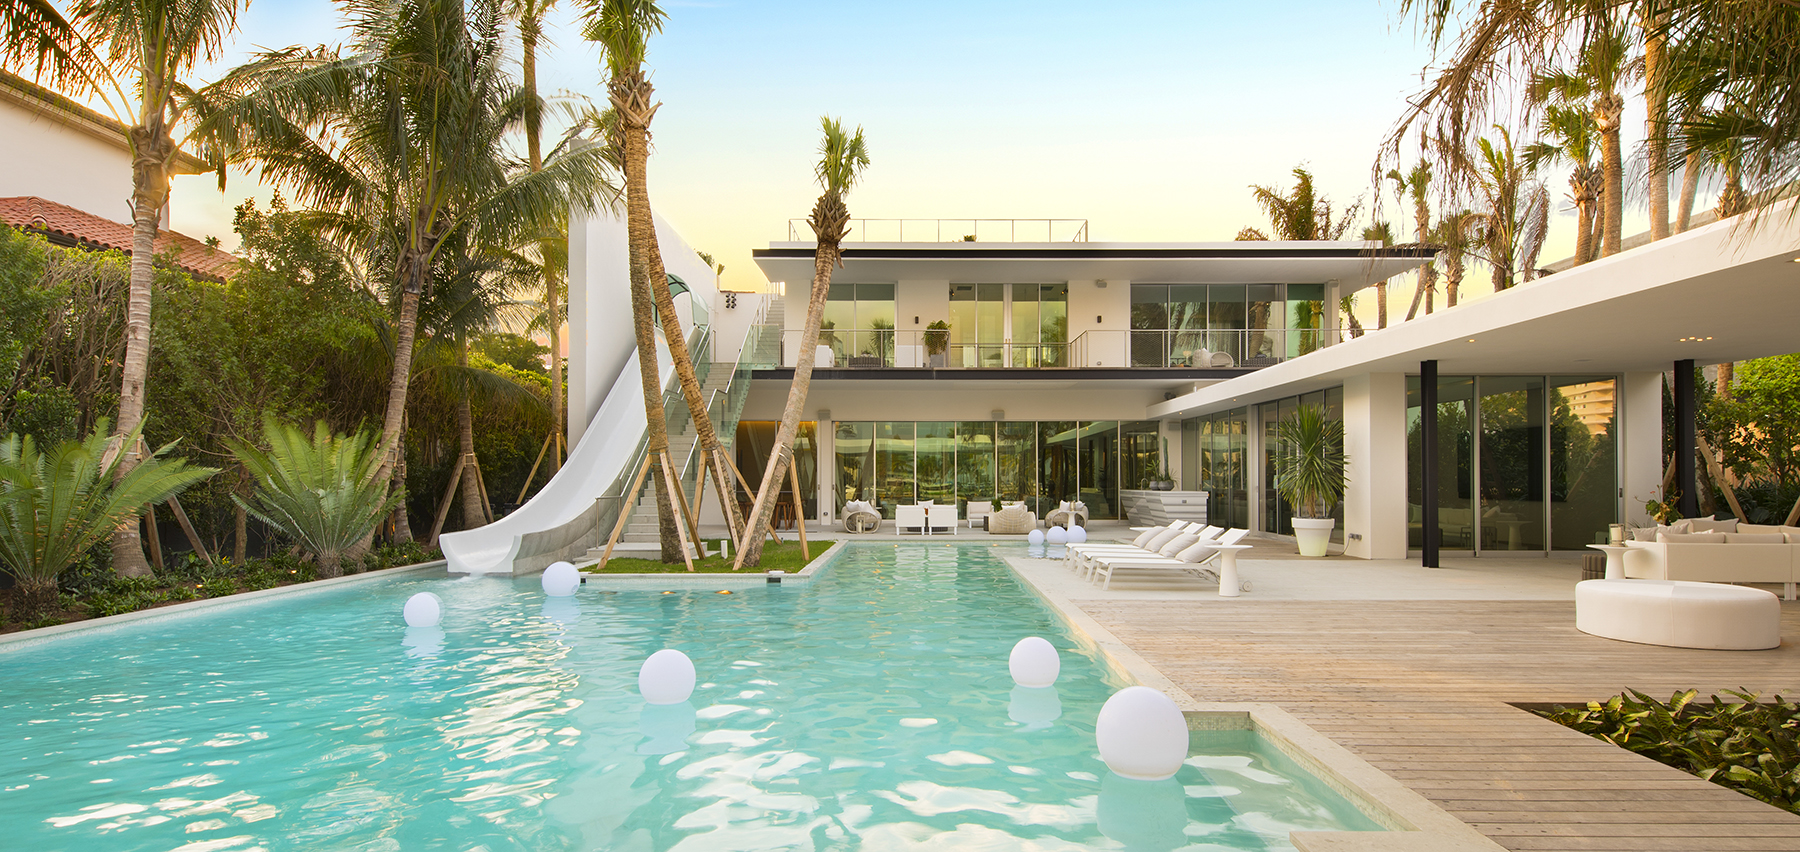 A Miami Beach spec mansion with a waterslide comprised of concrete into the pool.